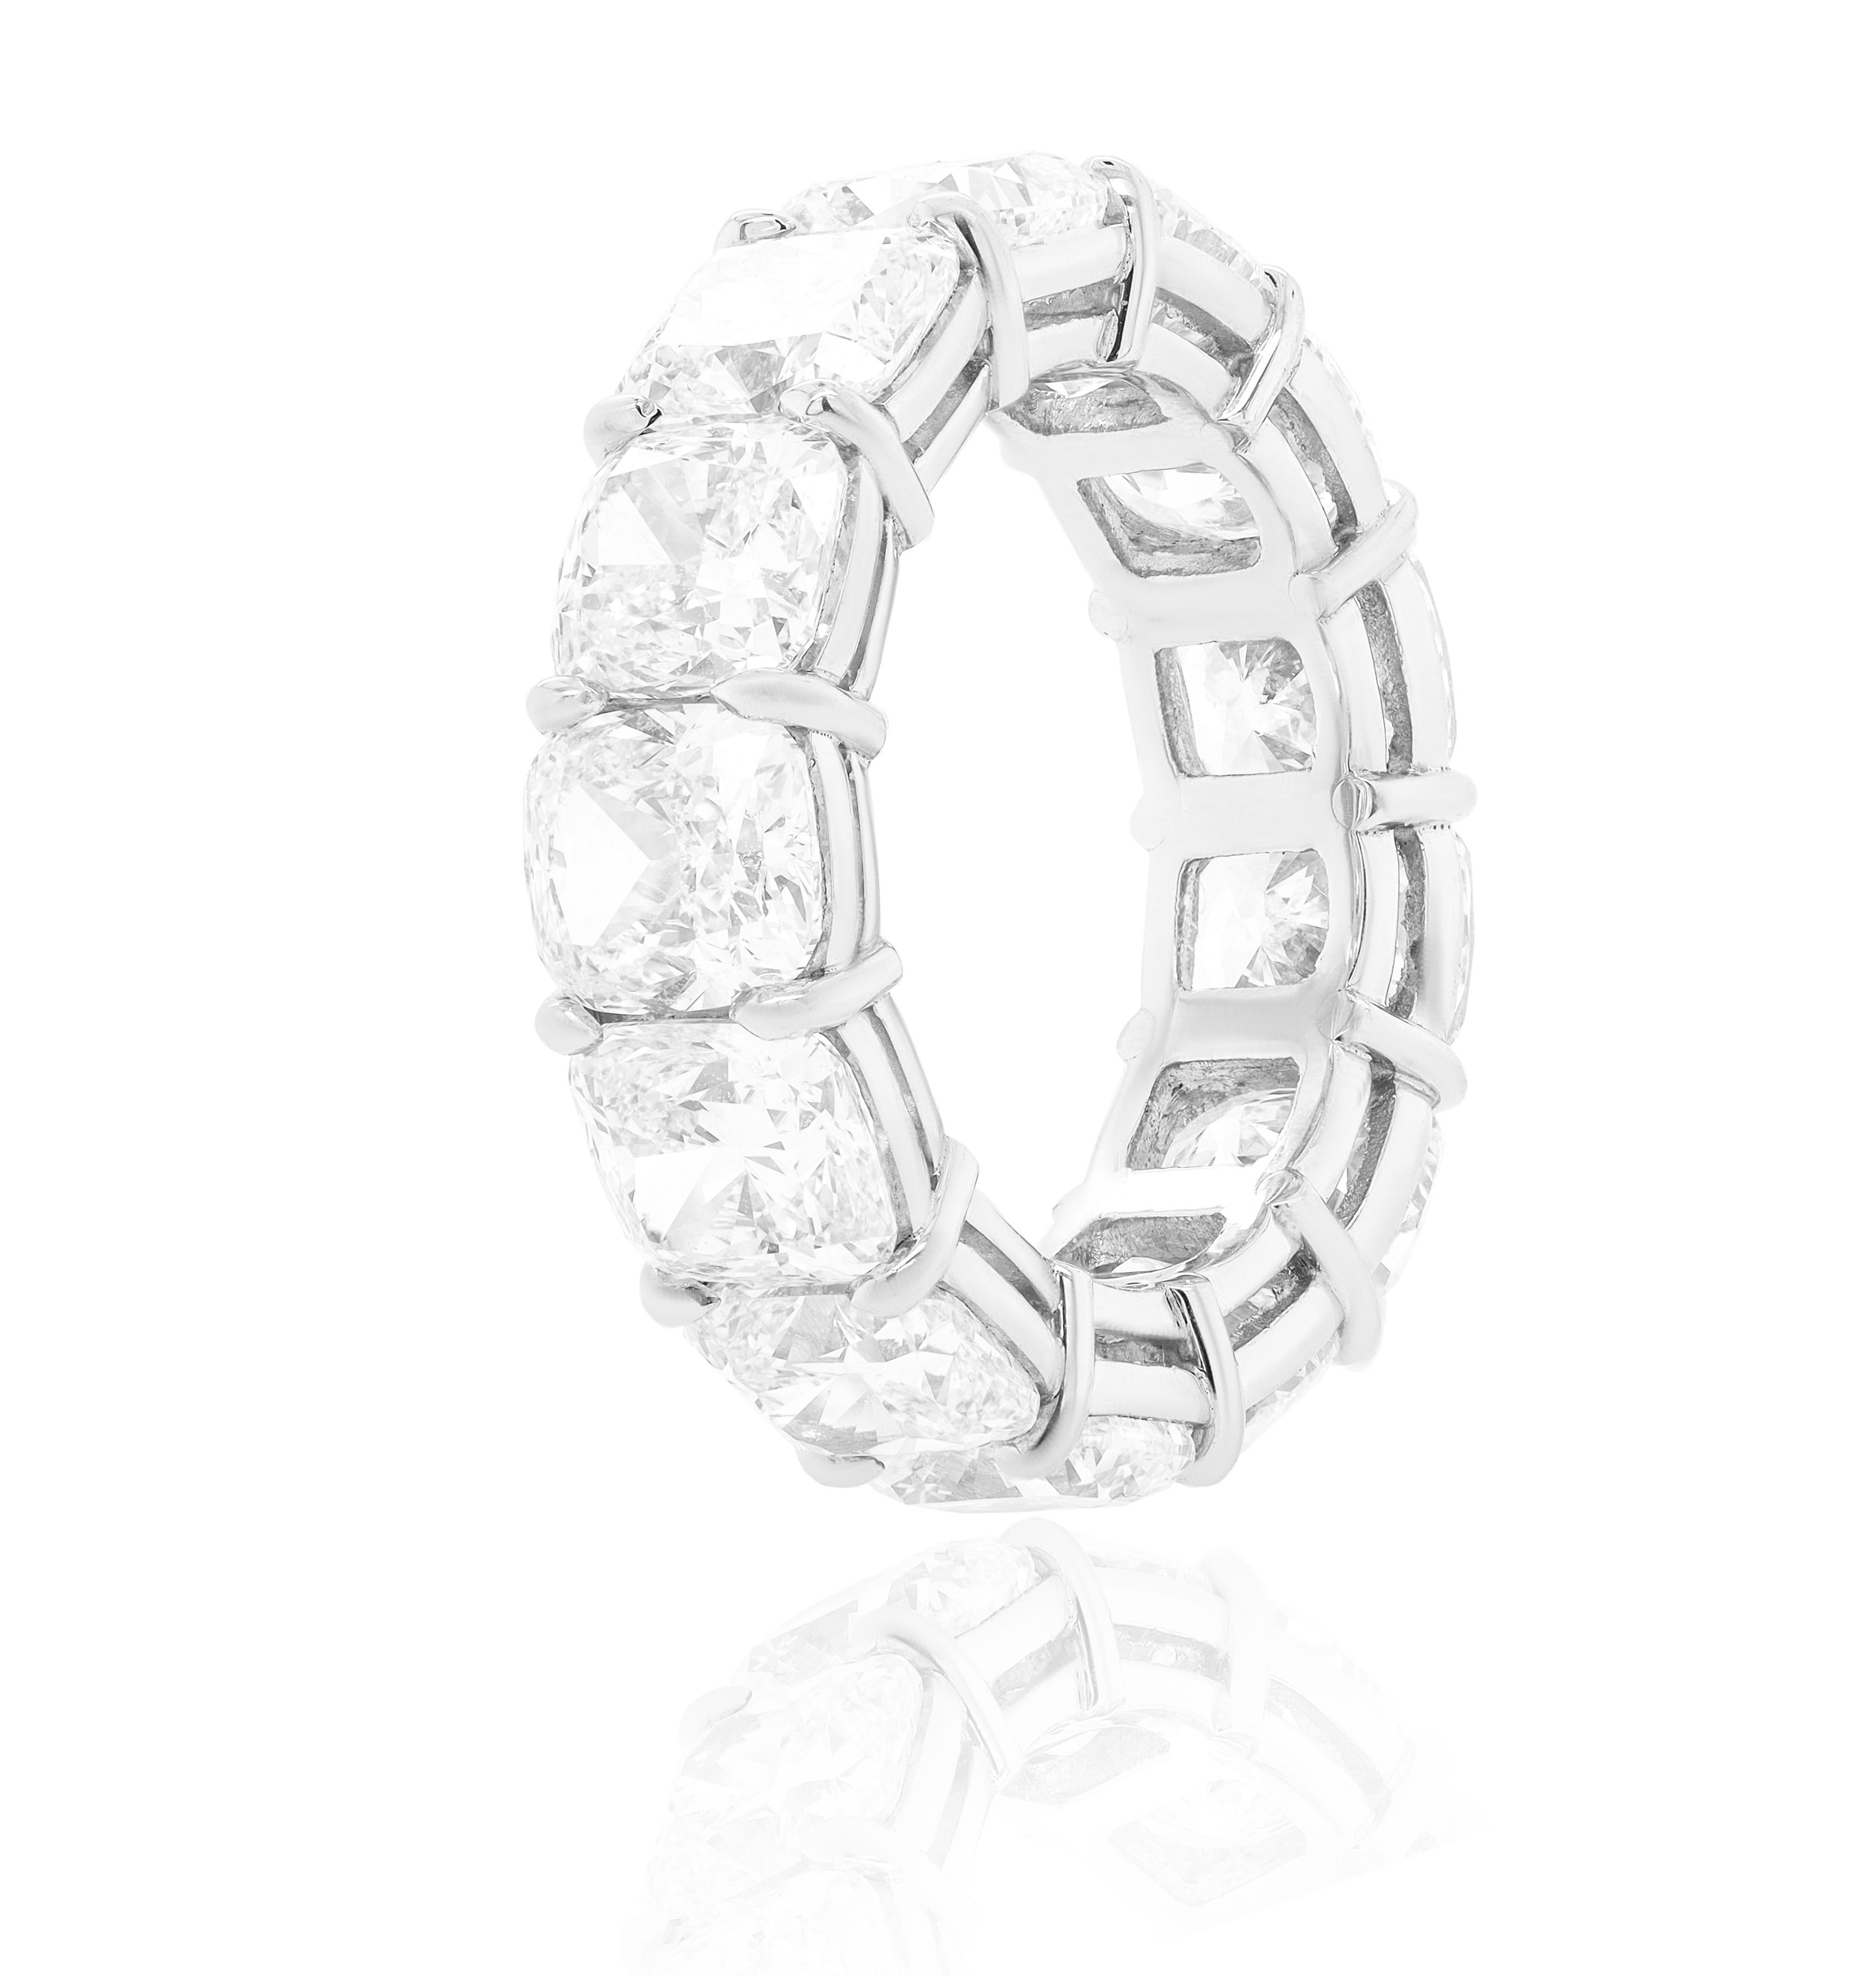 Platinum eternity band features 13.12 cts OF cushion cut diamonds FG color VVS/Vs clarity (13 stones)
Diana M. is a leading supplier of top-quality fine jewelry for over 35 years.
Diana M is one-stop shop for all your jewelry shopping, carrying line